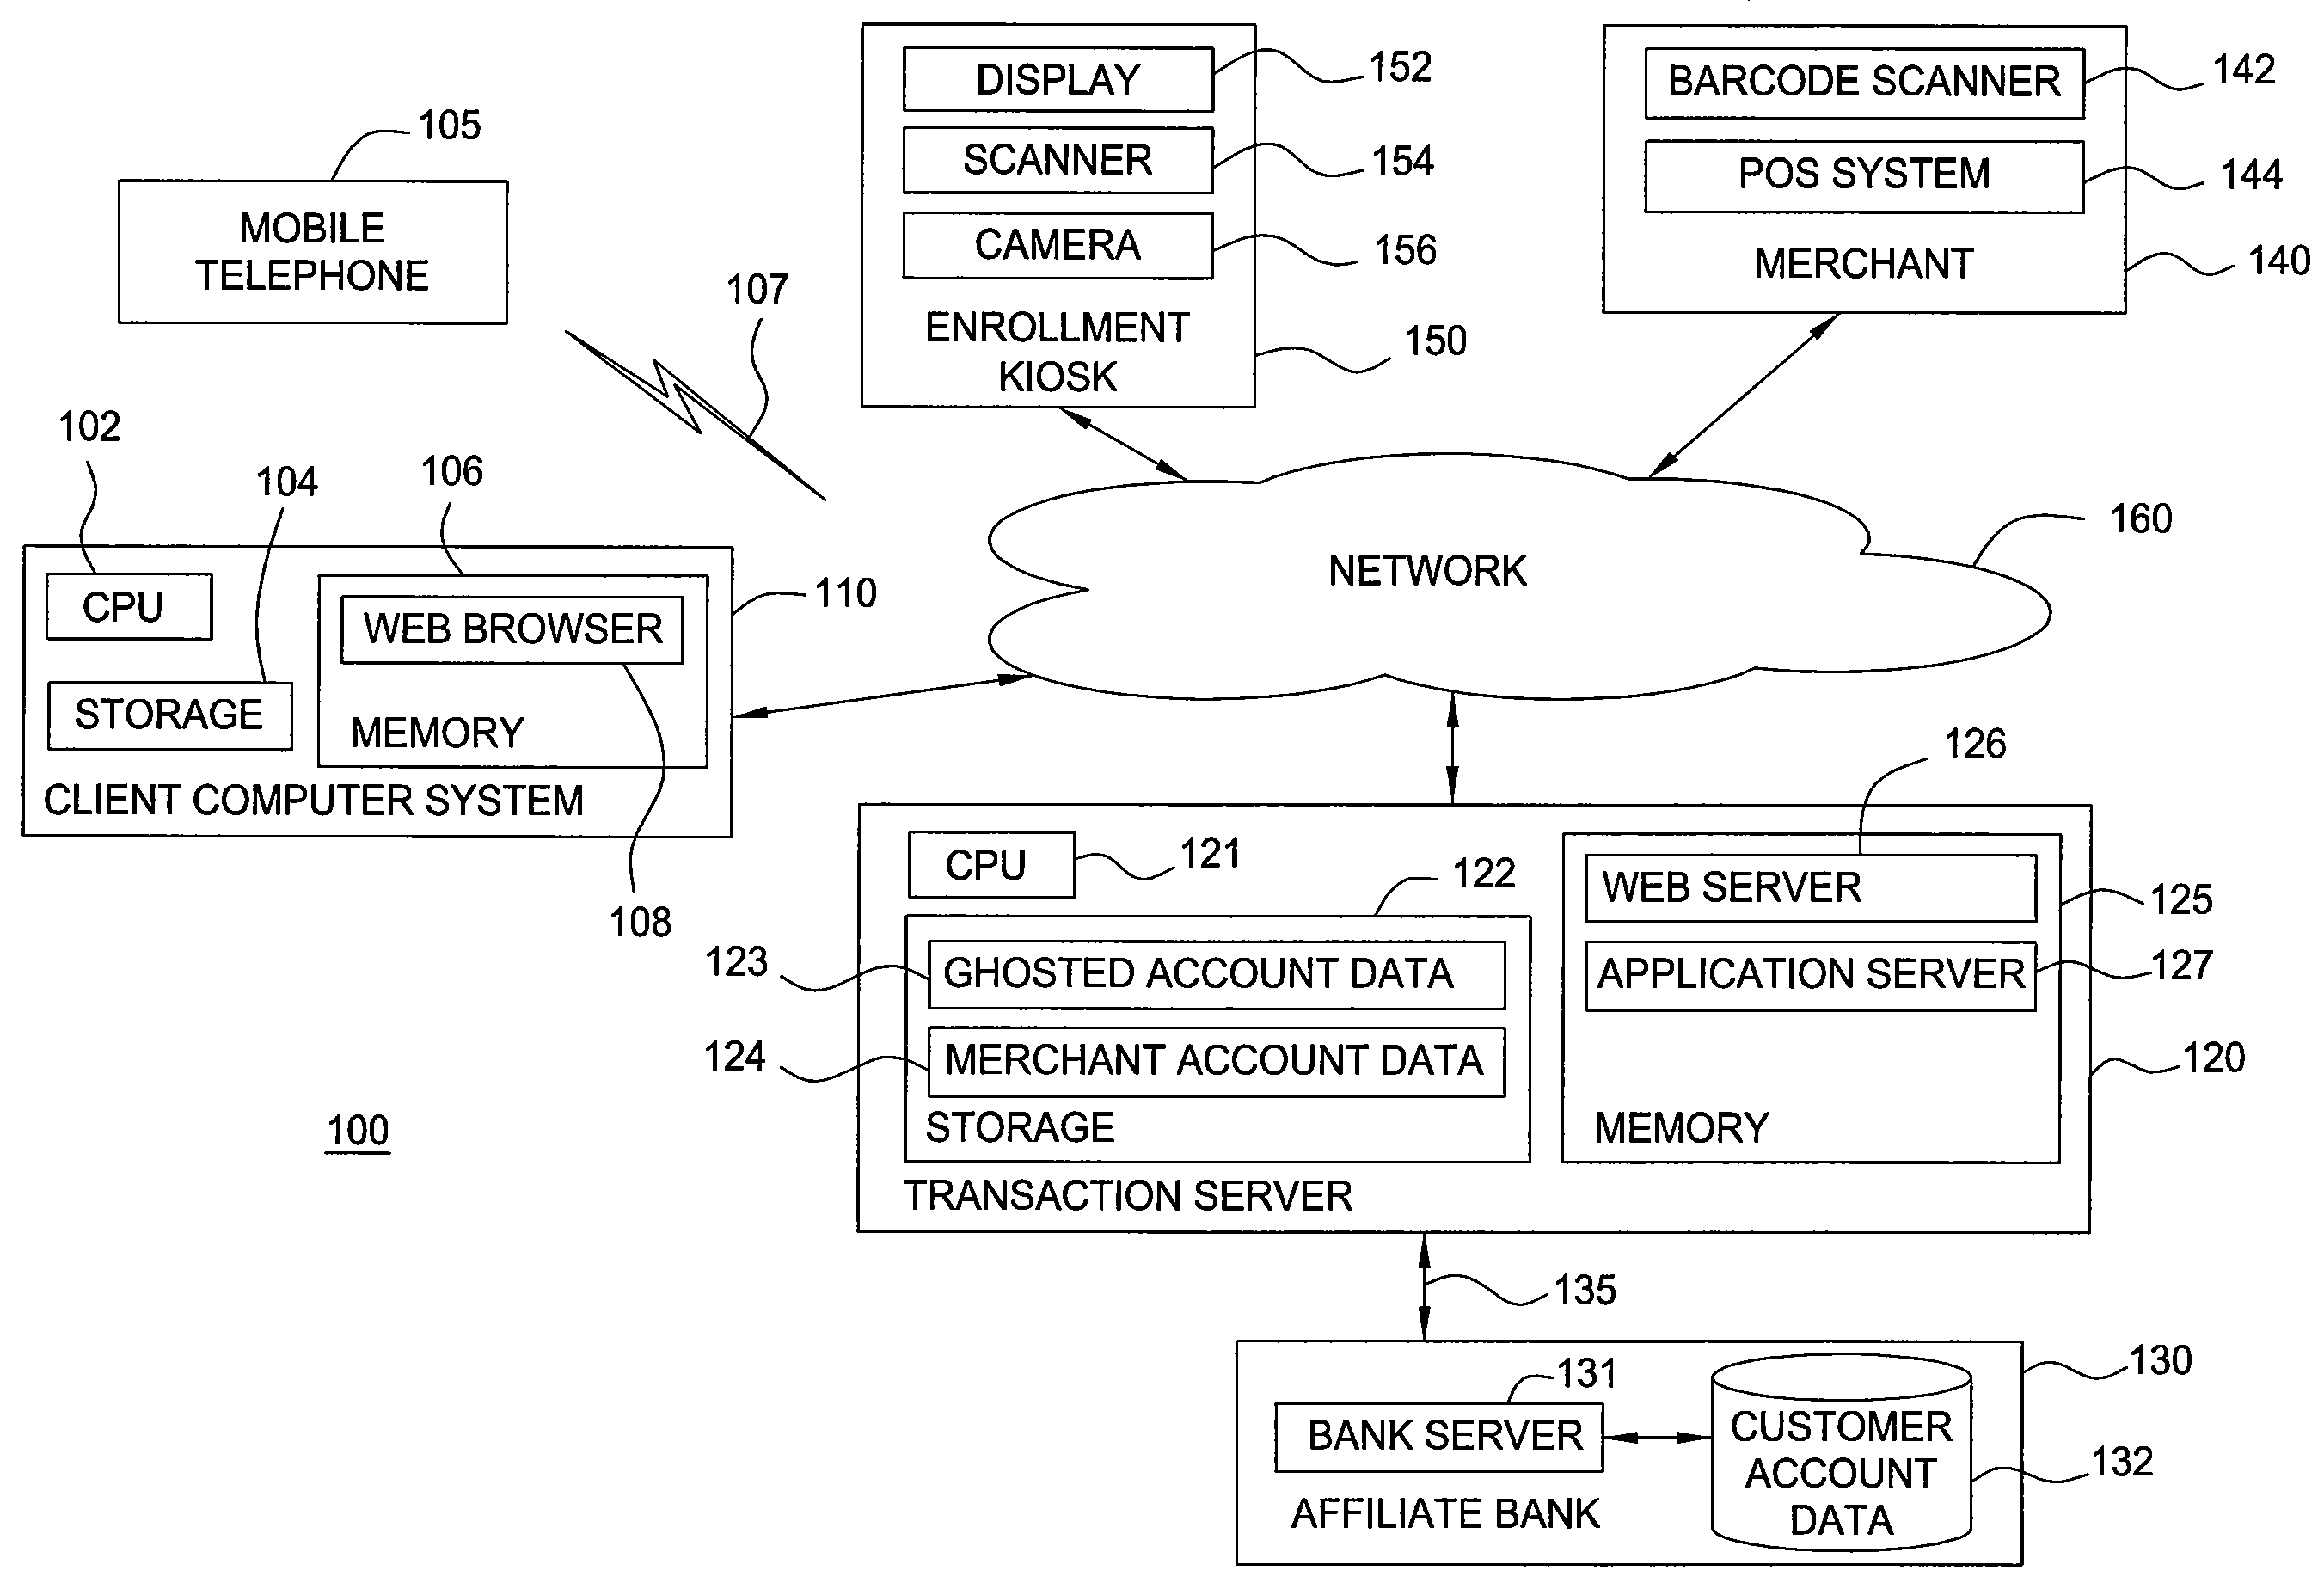 Ghosting payment account data in a mobile telephone payment transaction system